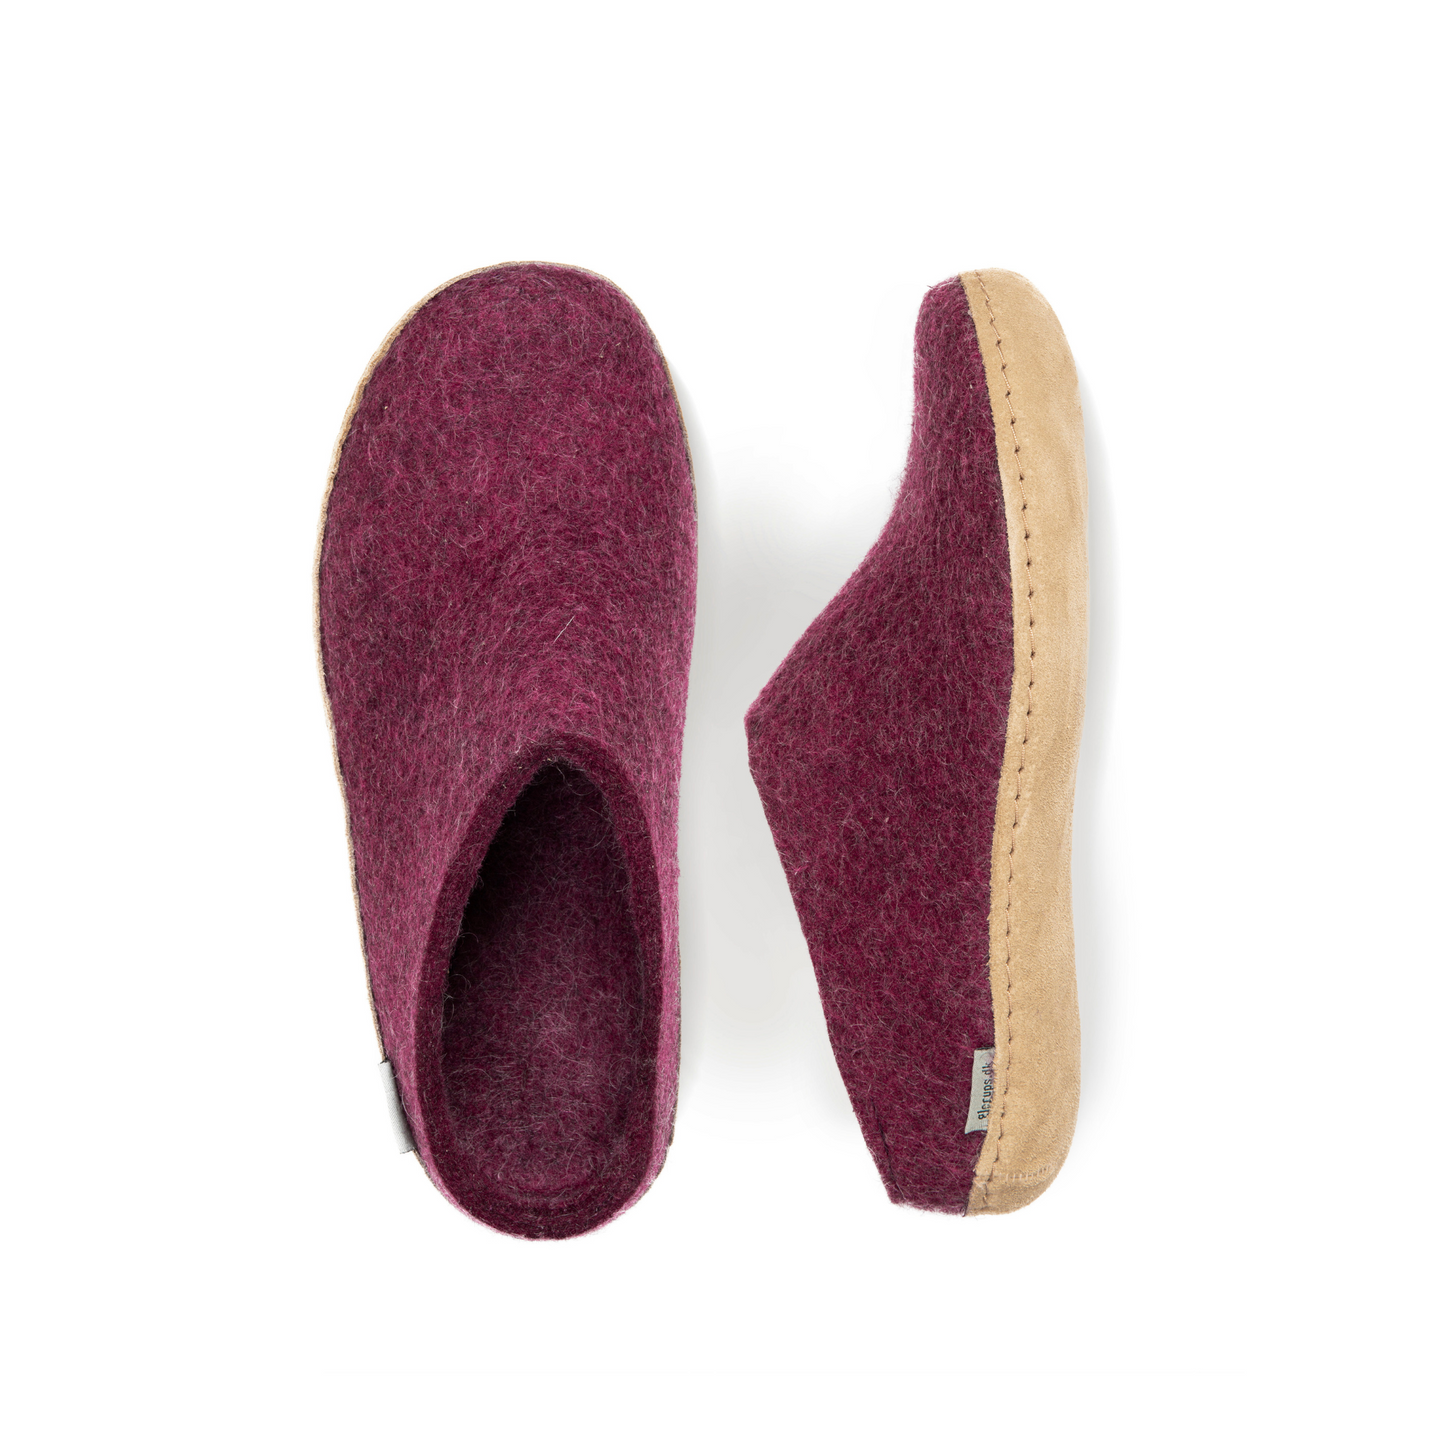 An overhead view of two deep-mauve felted wool slippers. One is pictured straight on, showing the top face of the slipper, while the other lays on its side, showing the profile with tan leather sole with a row of stitching.